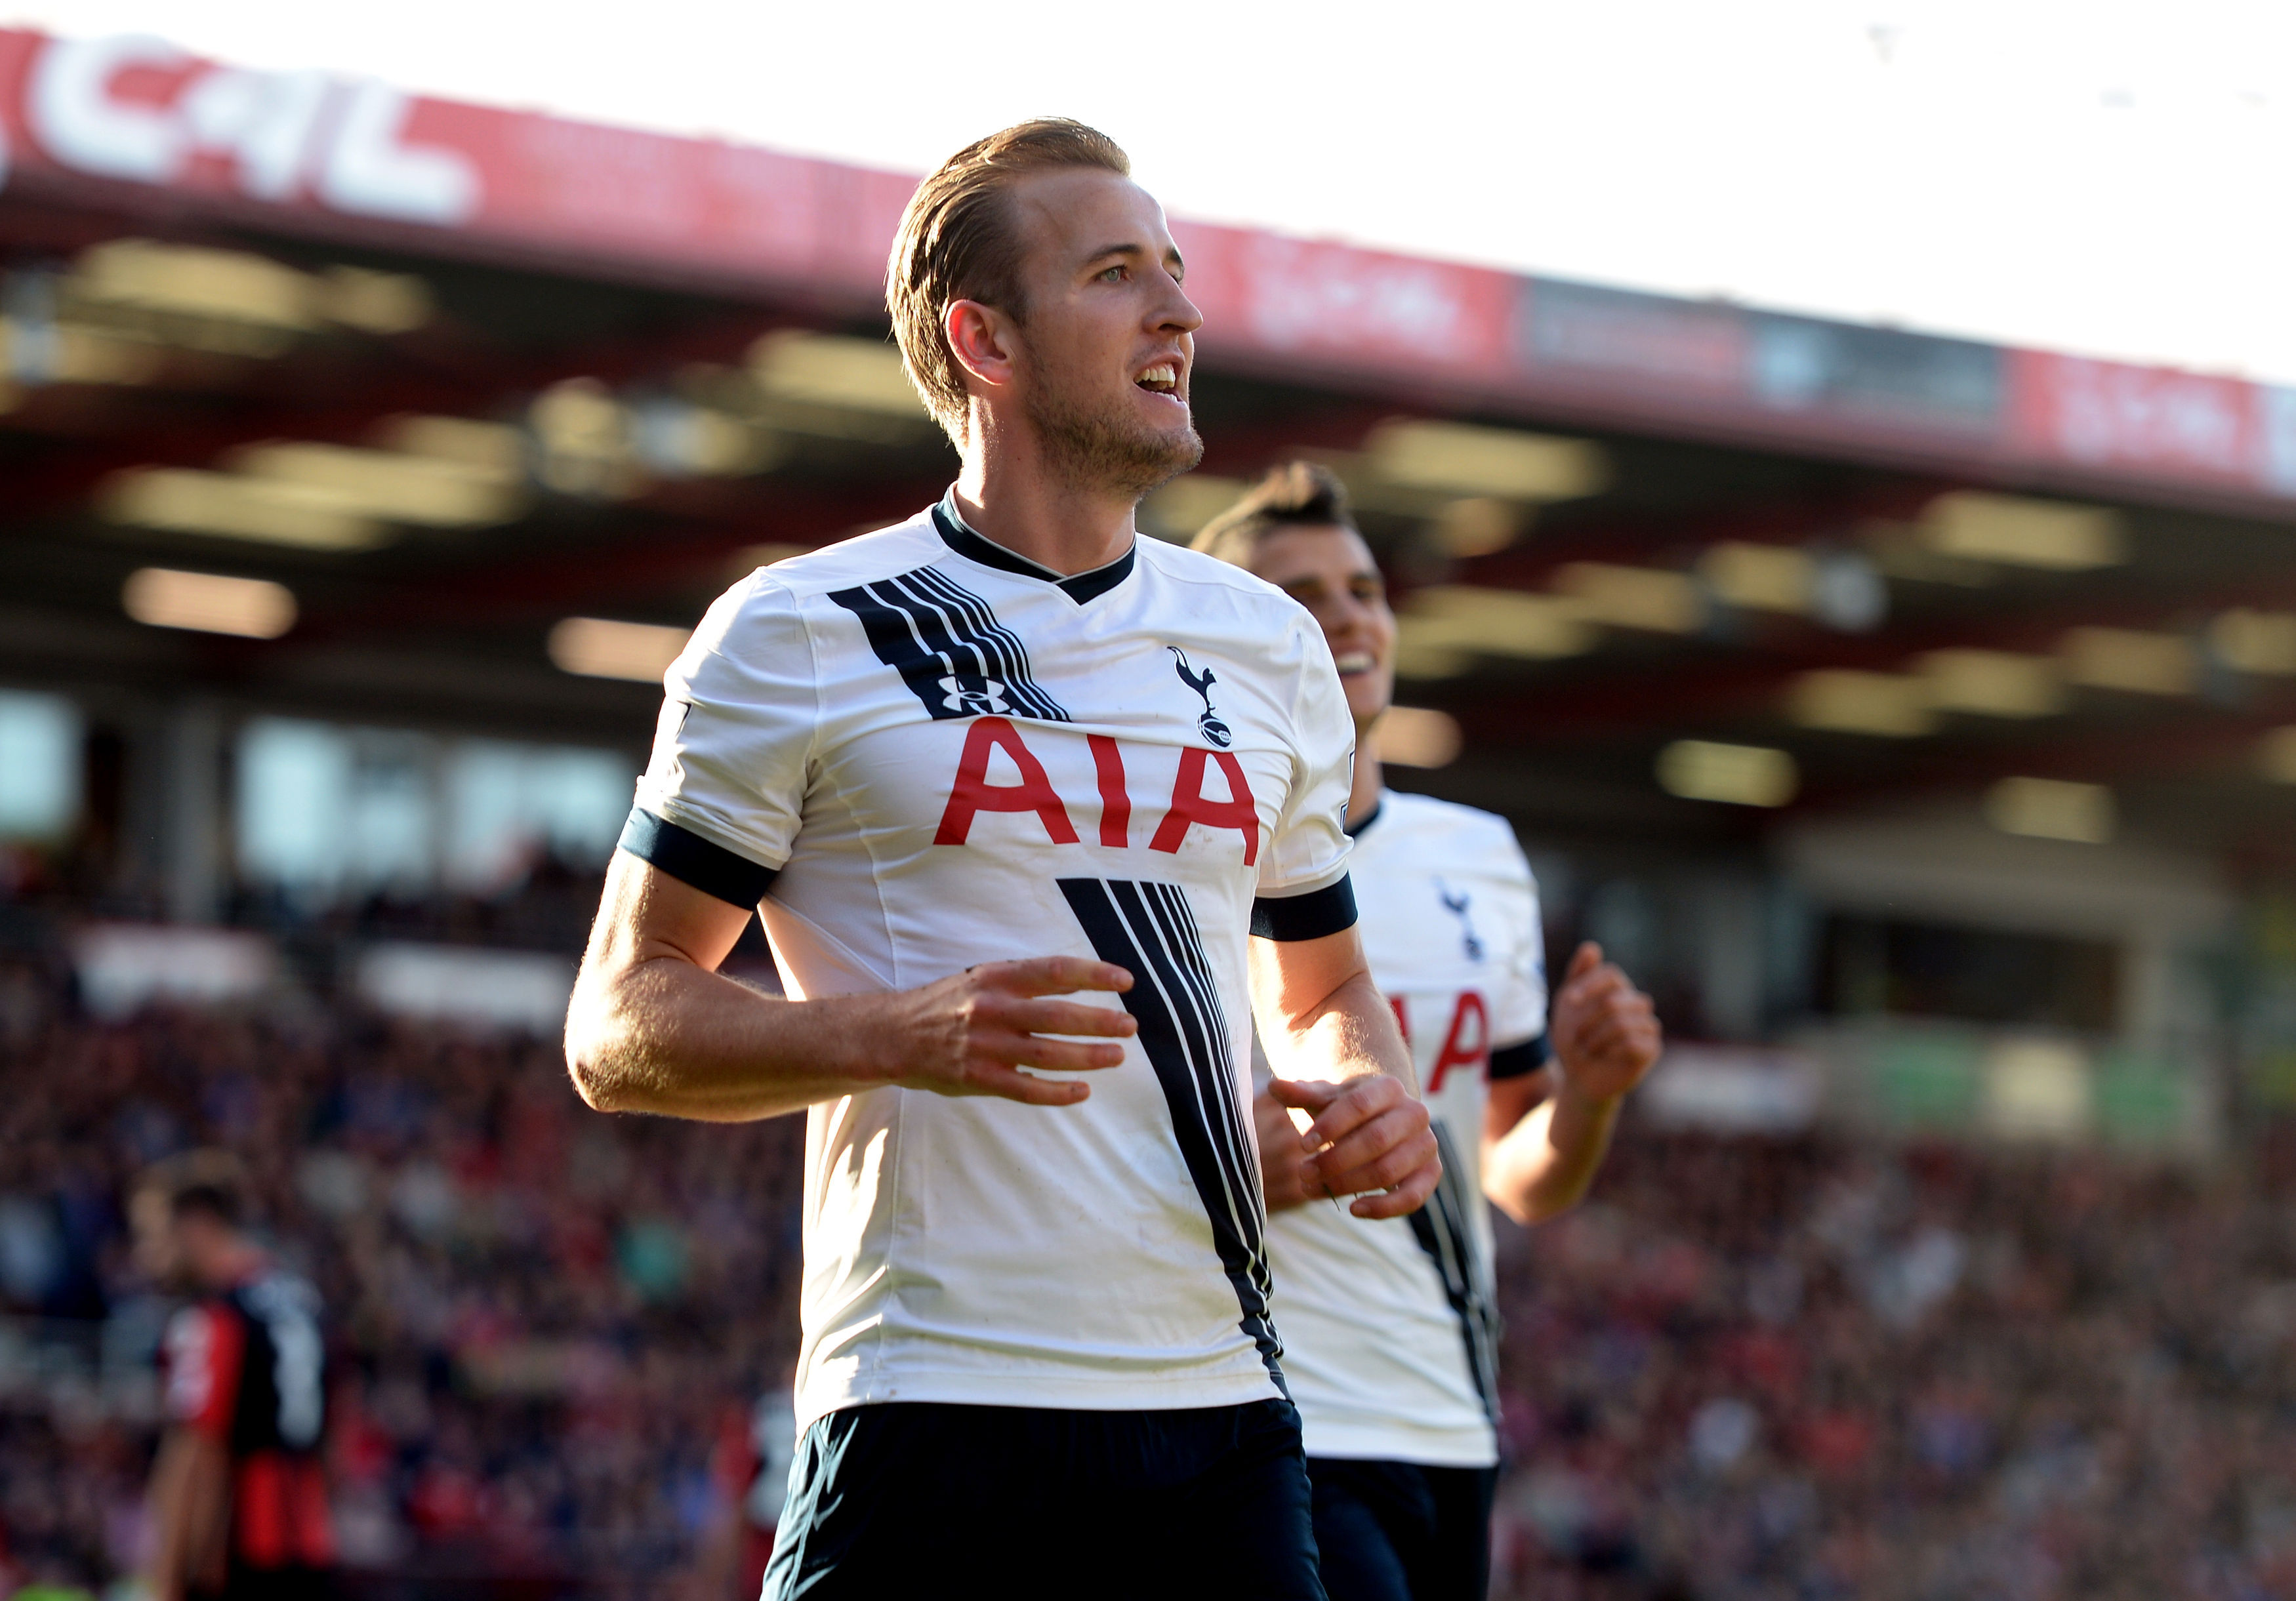 Tottenham Hotspur's Harry Kane celebrates scoring his side's fourth goal of the game, during the English Premier League soccer match between Bournemouth and  Tottenham Hotspur, at the Vitality Stadium, in Bournemouth, England, Sunday Oct. 25, 2015. (Adam Davy/PA Photo via AP) UNITED KINGDOM OUT NO SALES NO ARCHIVE